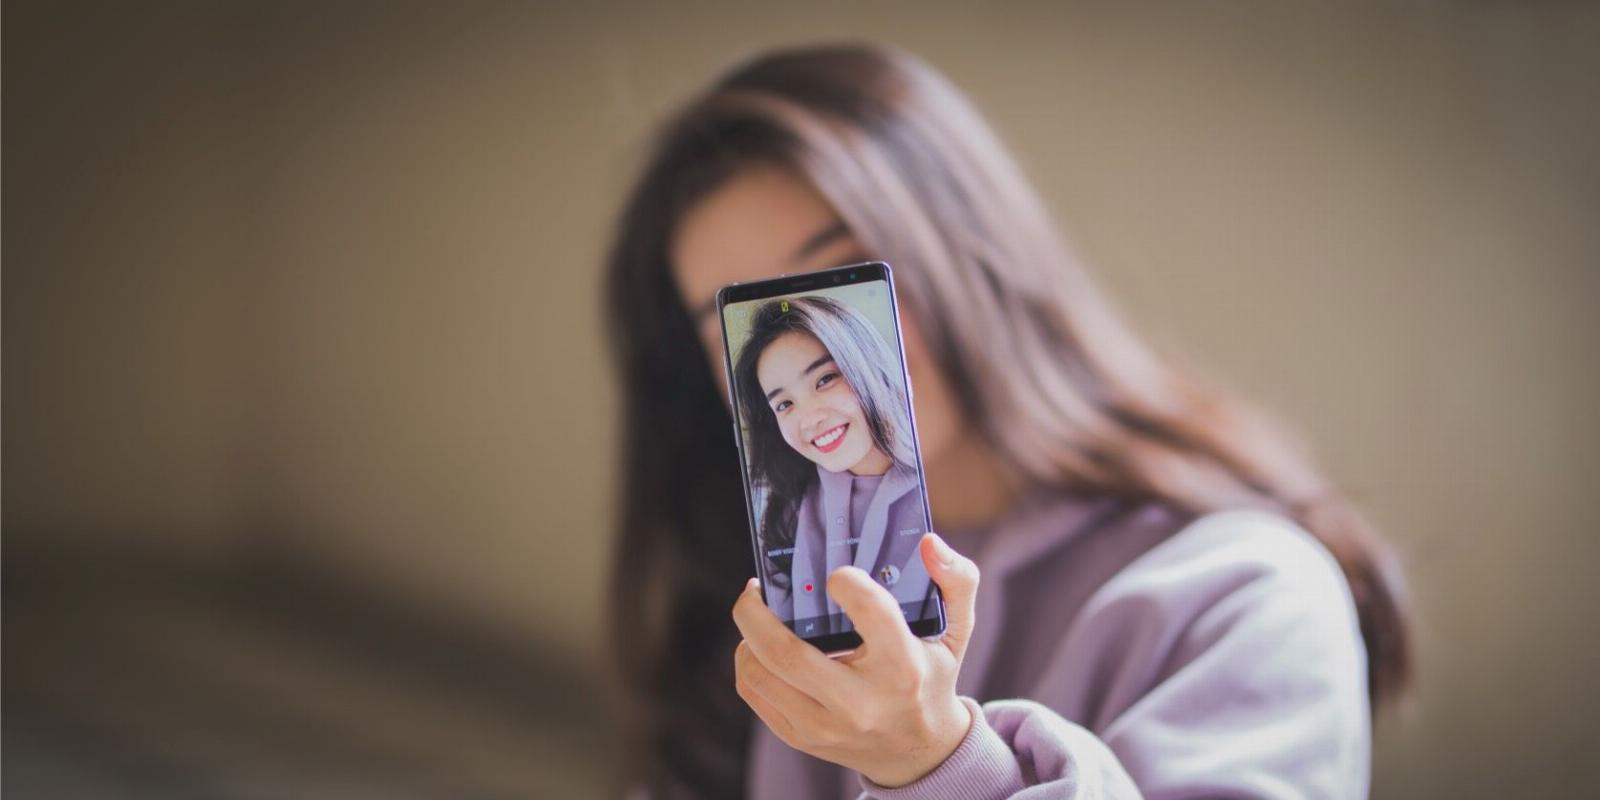 Why TikTok Influencers Are Getting Flak for Using Filters